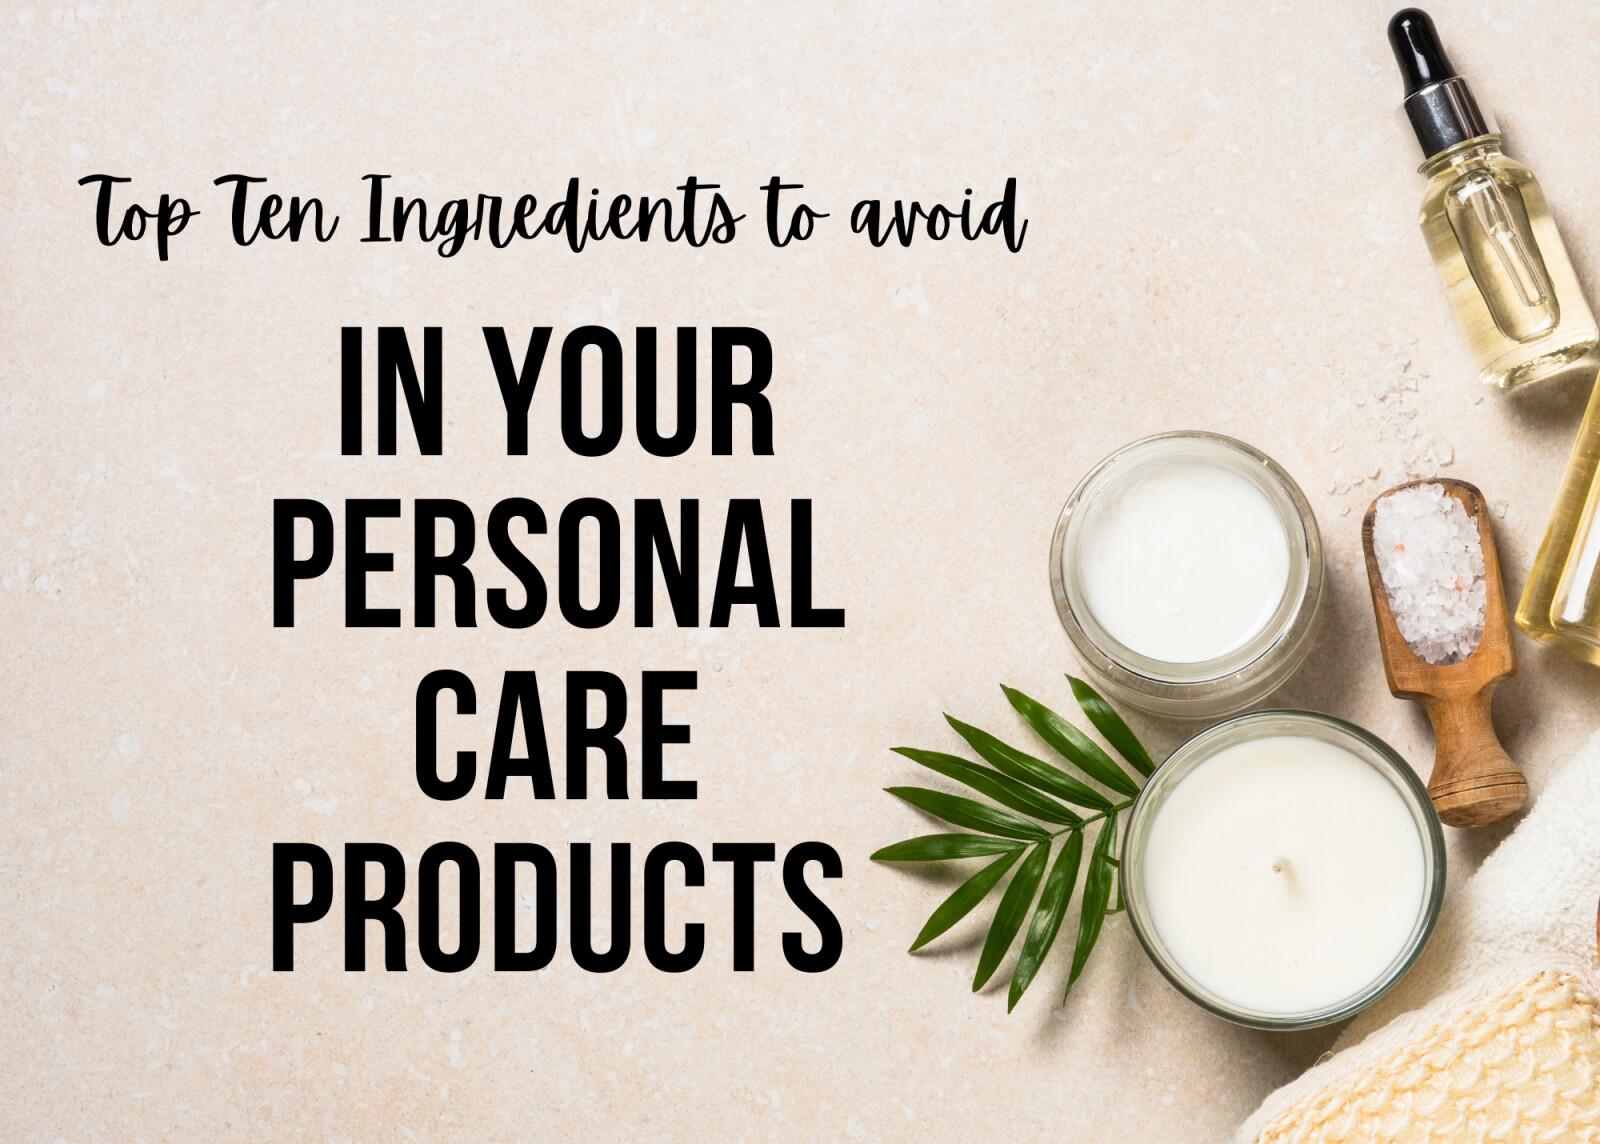 Top Ten ingredients to AVOID in Your Personal Care Products